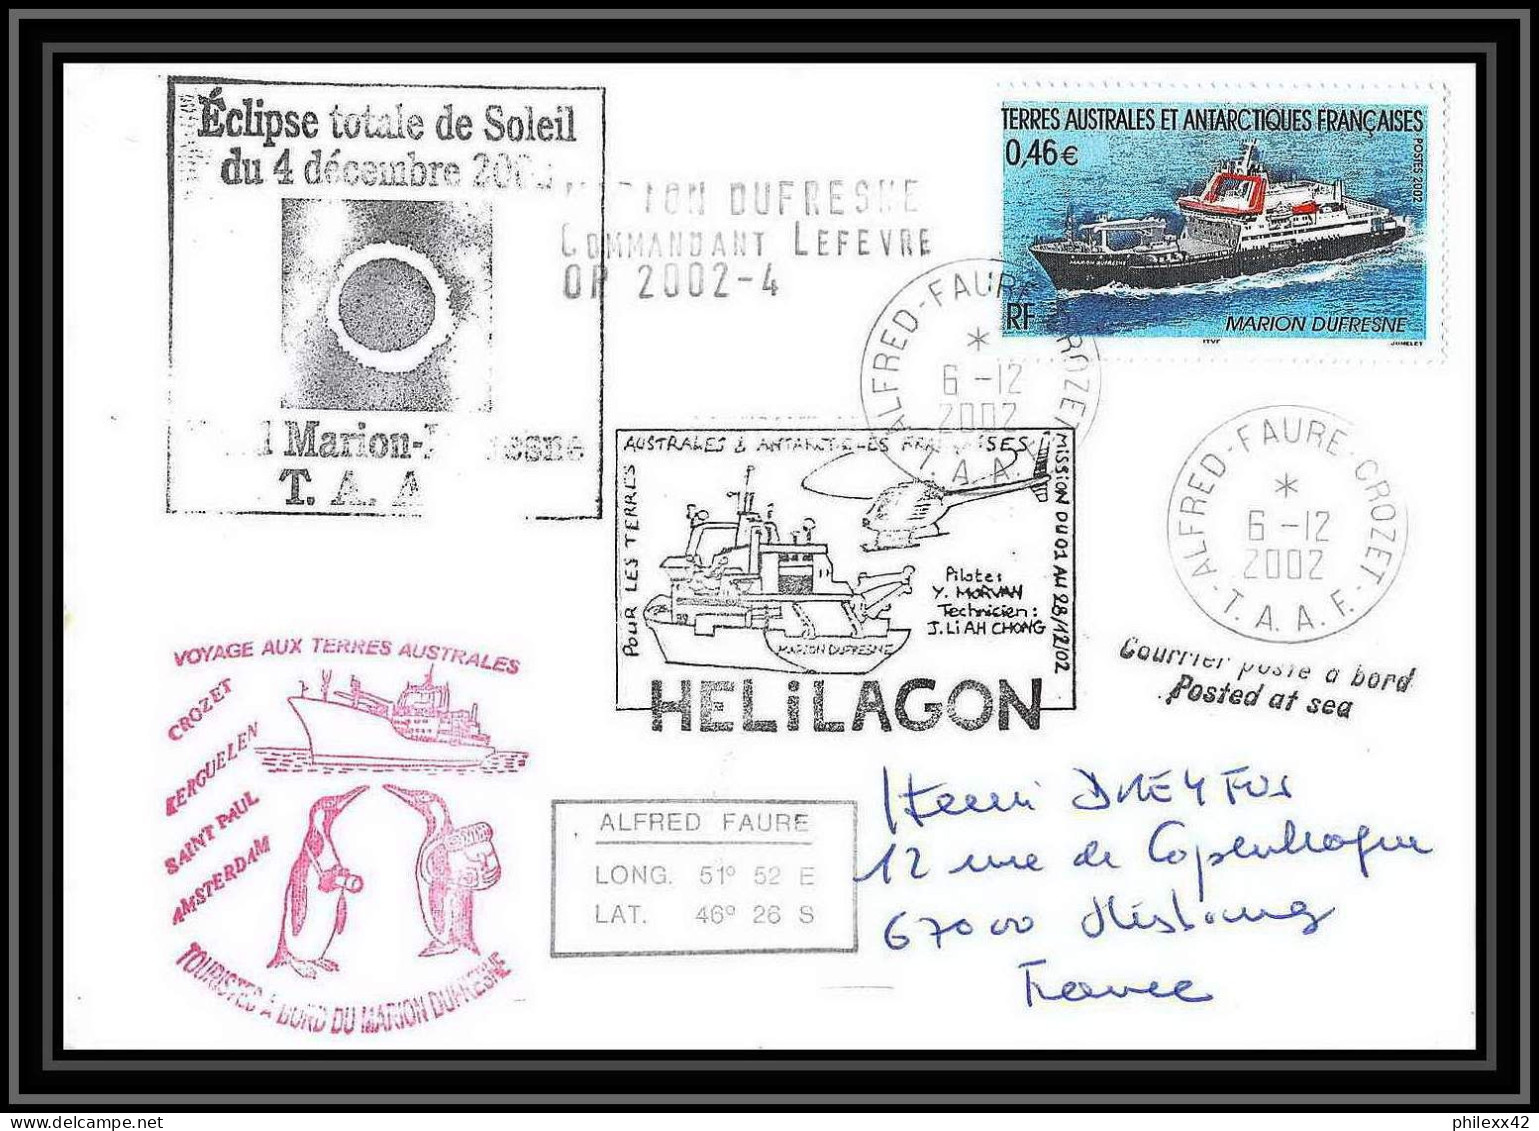 2386 ANTARCTIC Terres Australes TAAF Lettre Cover Dufresne 2 N°330 Helilagon Signé Signed Op 2002/4 6/12/2002 - Antarctic Expeditions